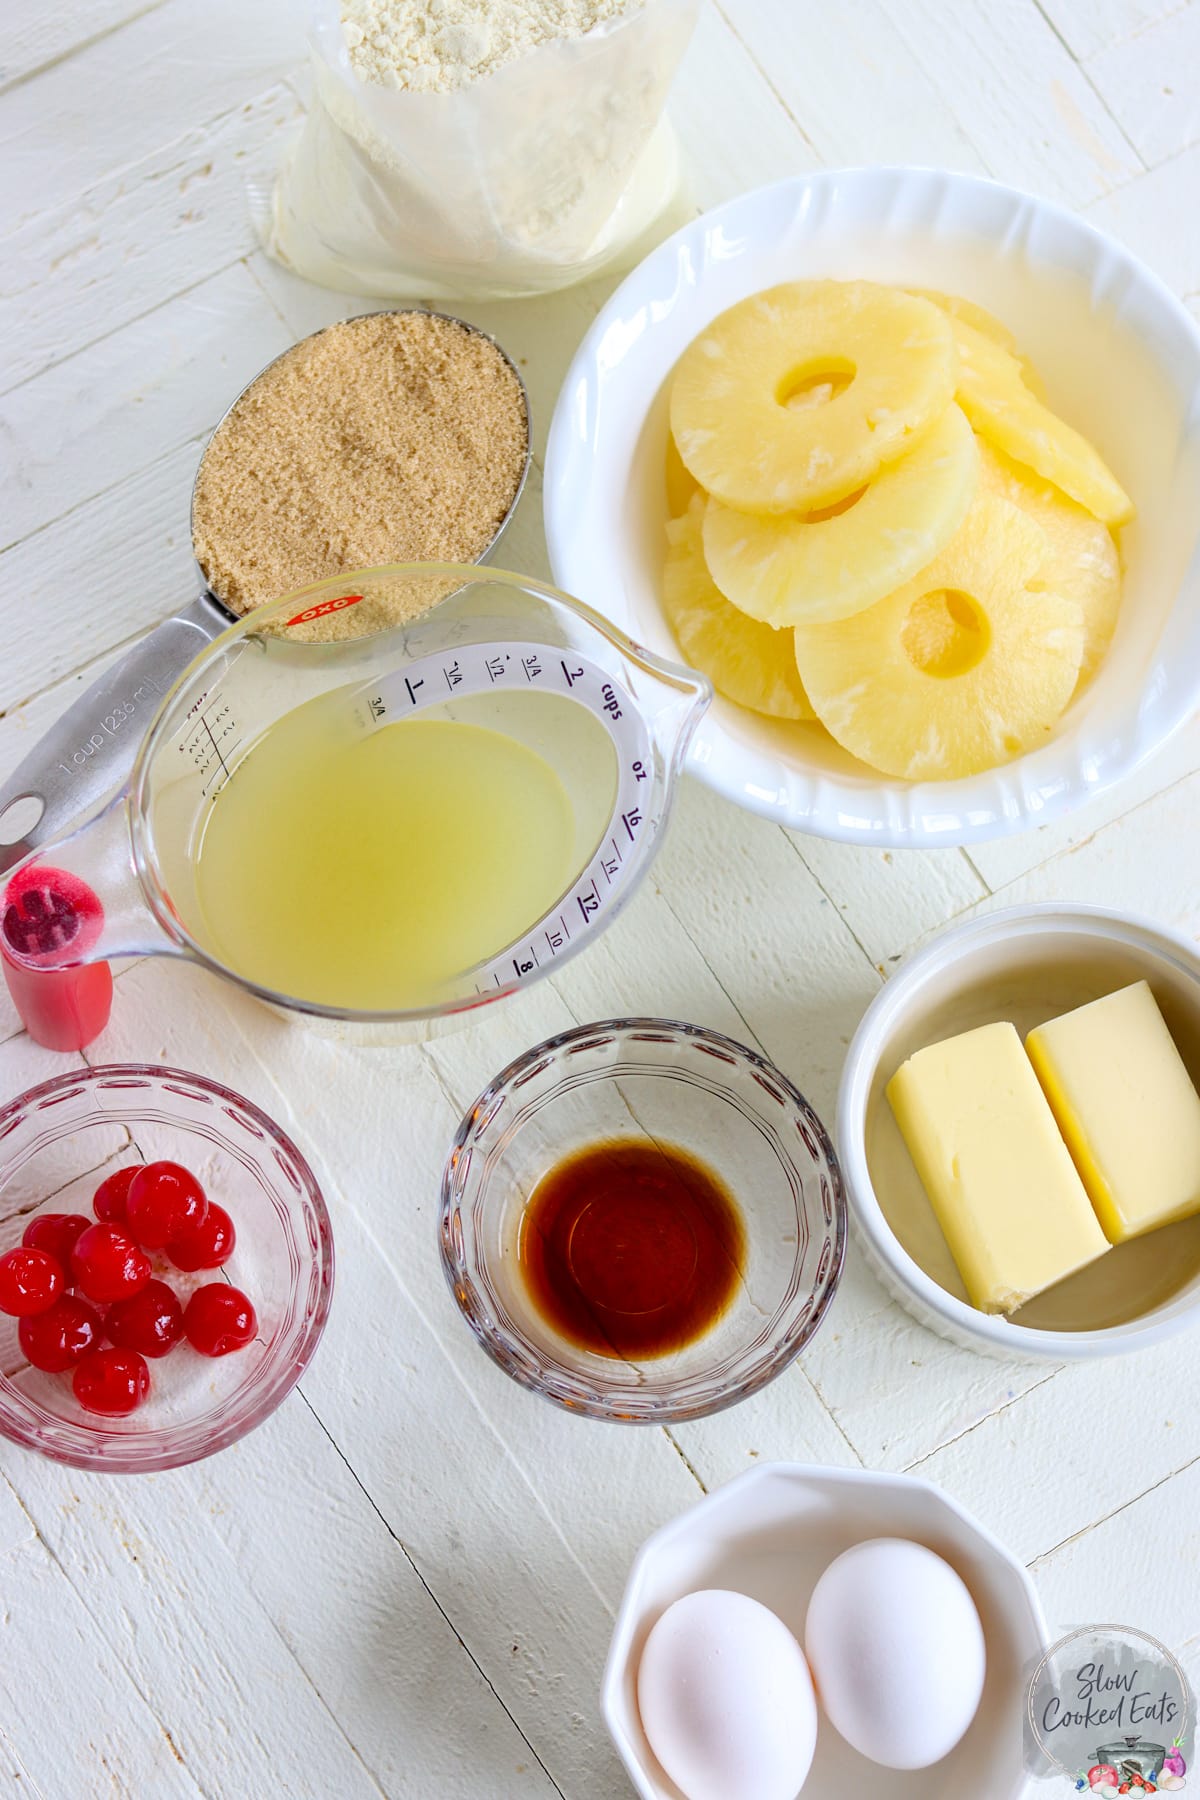 The ingredients needed for making crock pot pineapple upside down cake on a white board.